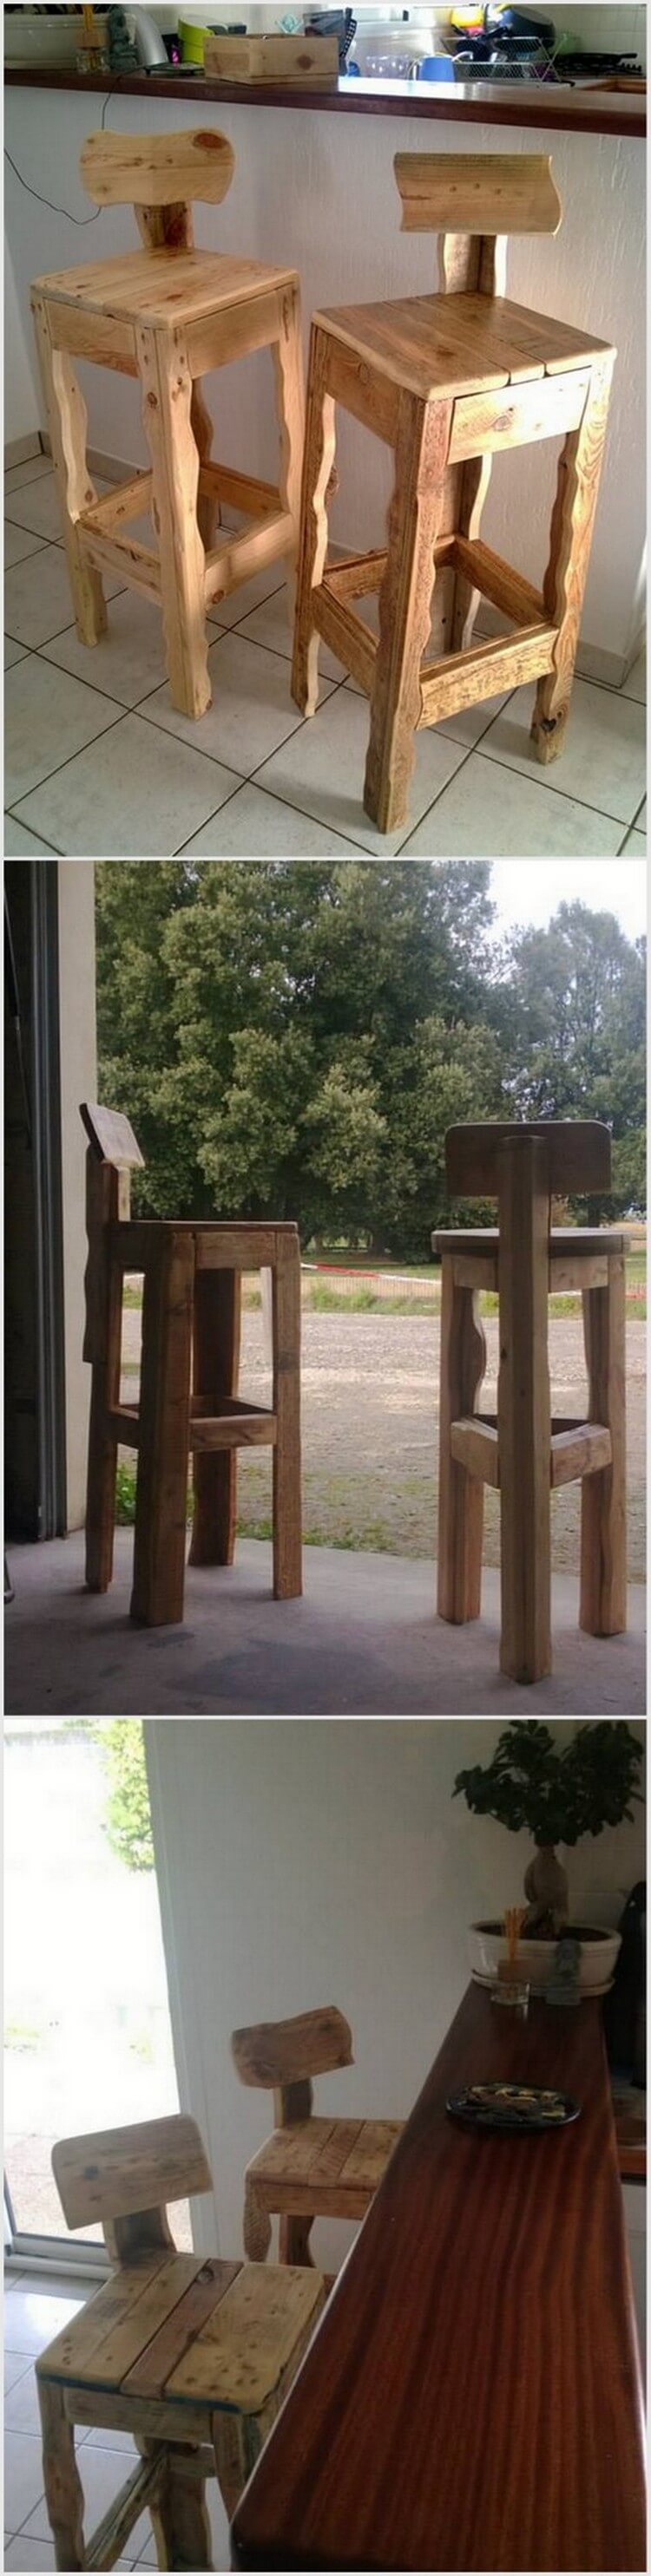 Wood Pallet Chairs